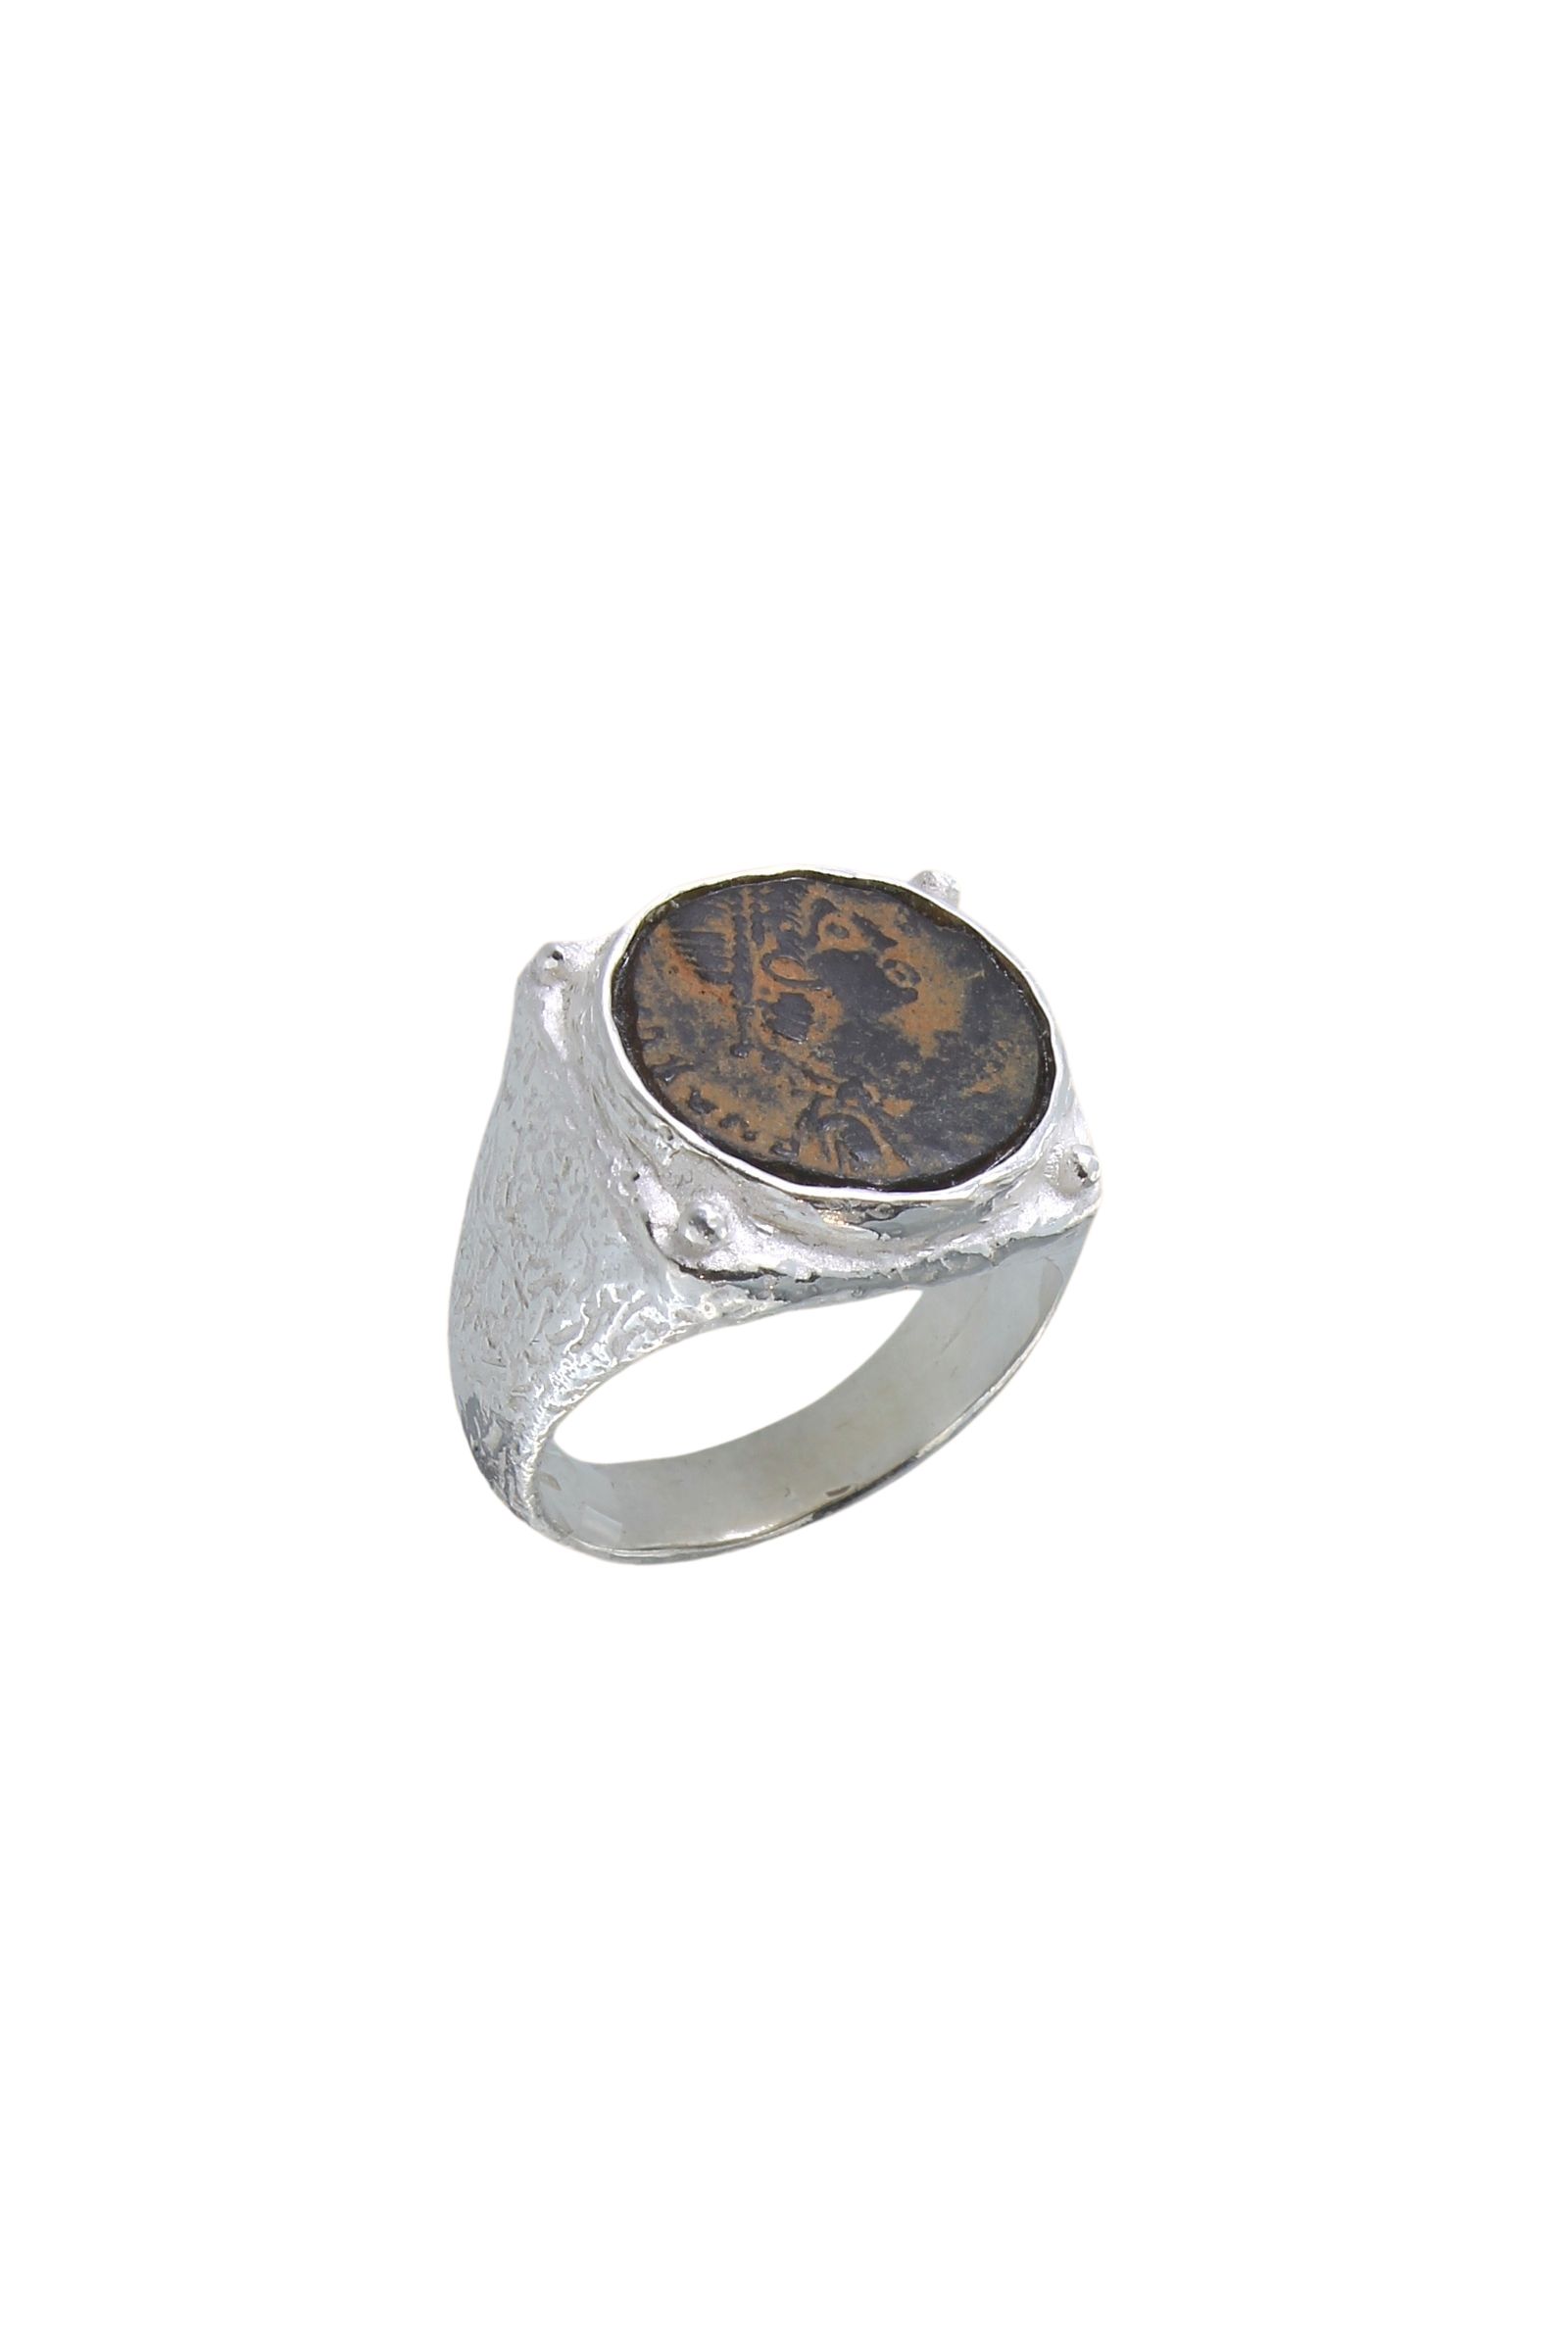 AE652-Sterling-Silver-925-Roman-Coin-Ring-1_